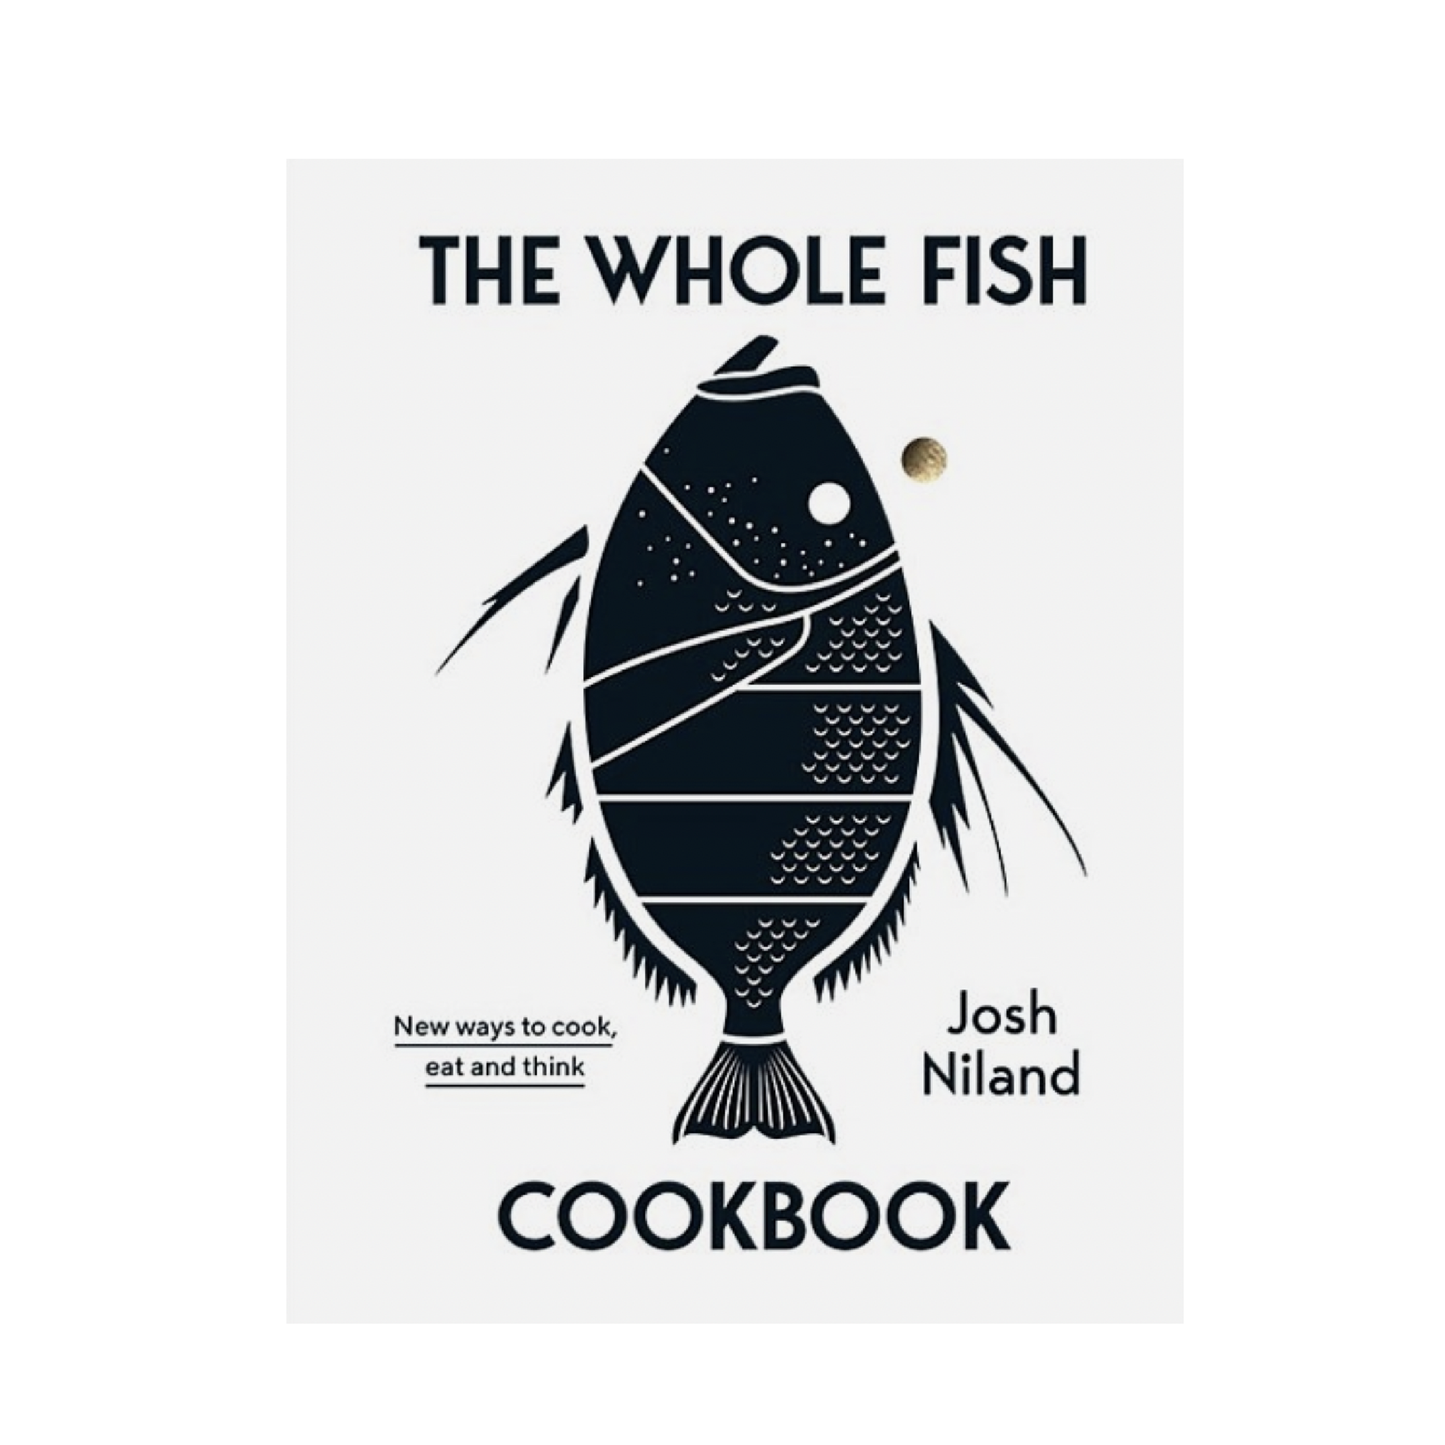 The Whole Fish Cookbook by Josh Niland - SIGNED COPY